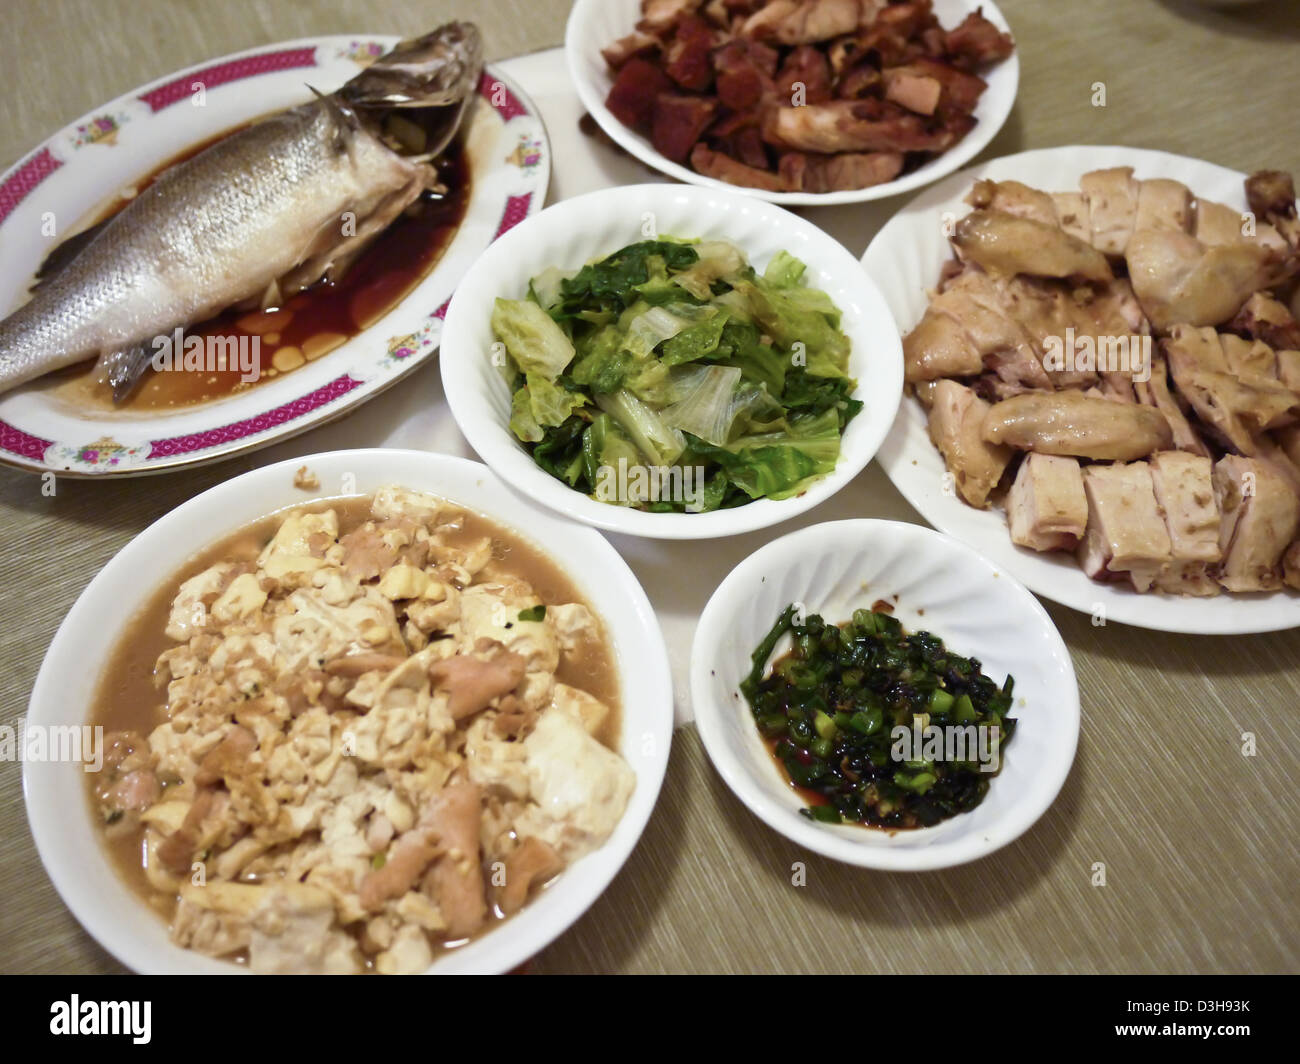 Chinese new year dinner dishes home celebration Stock Photo